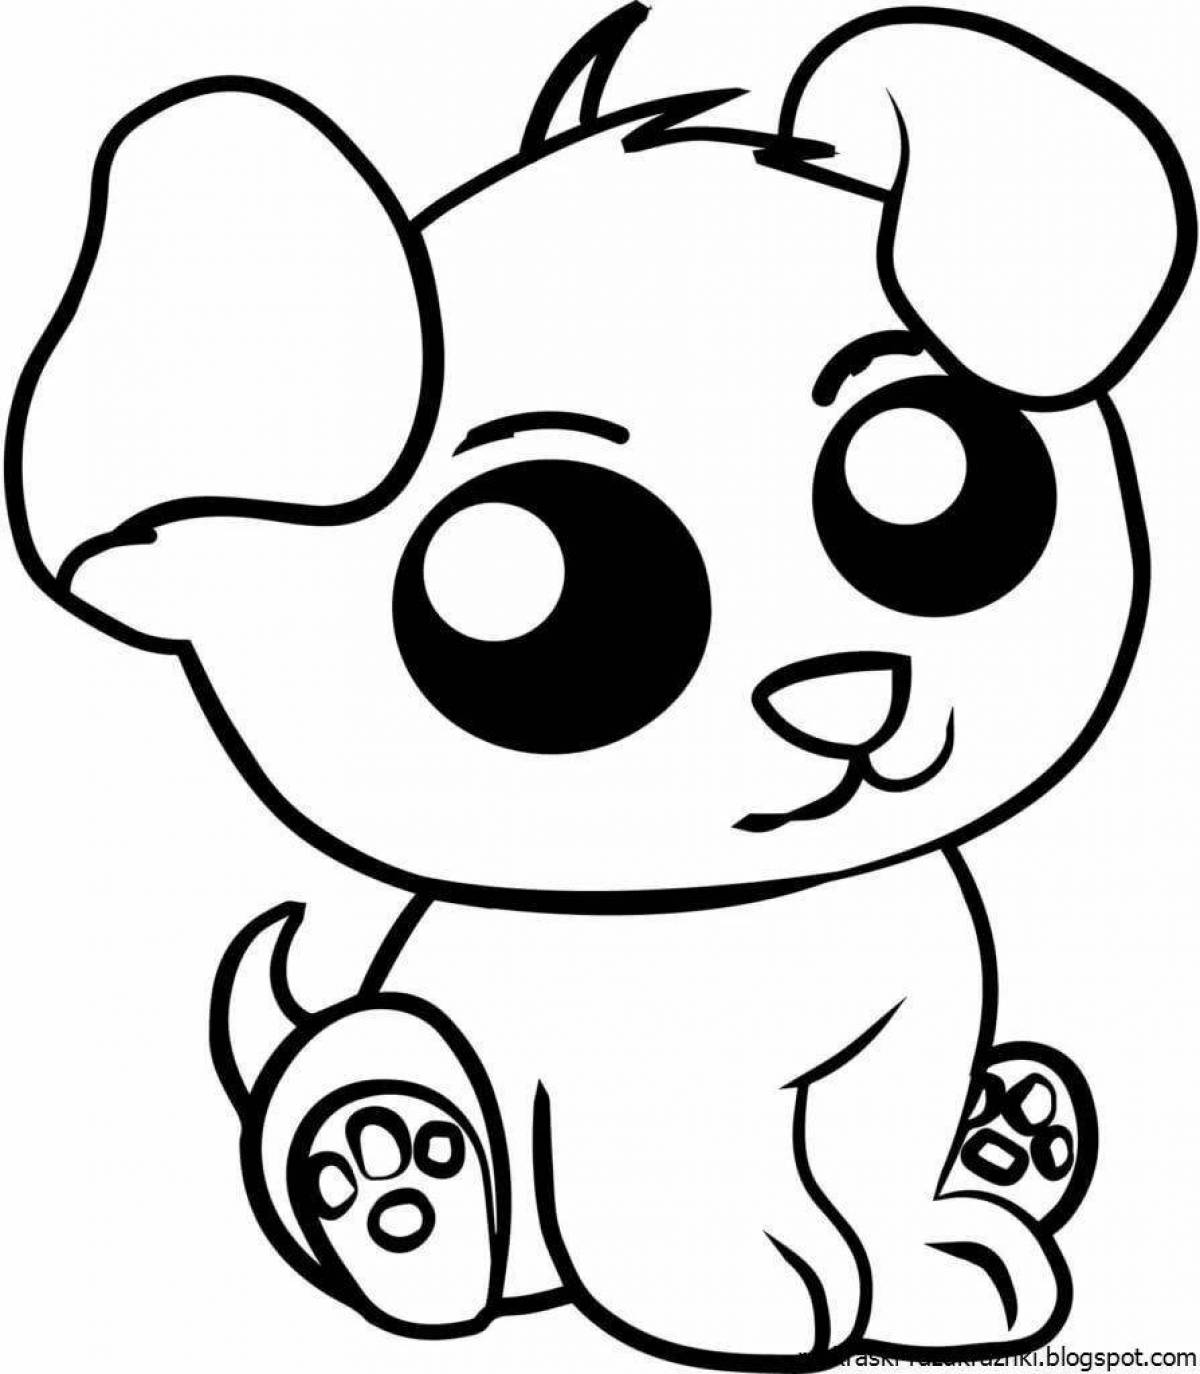 Snuggly little puppy coloring page